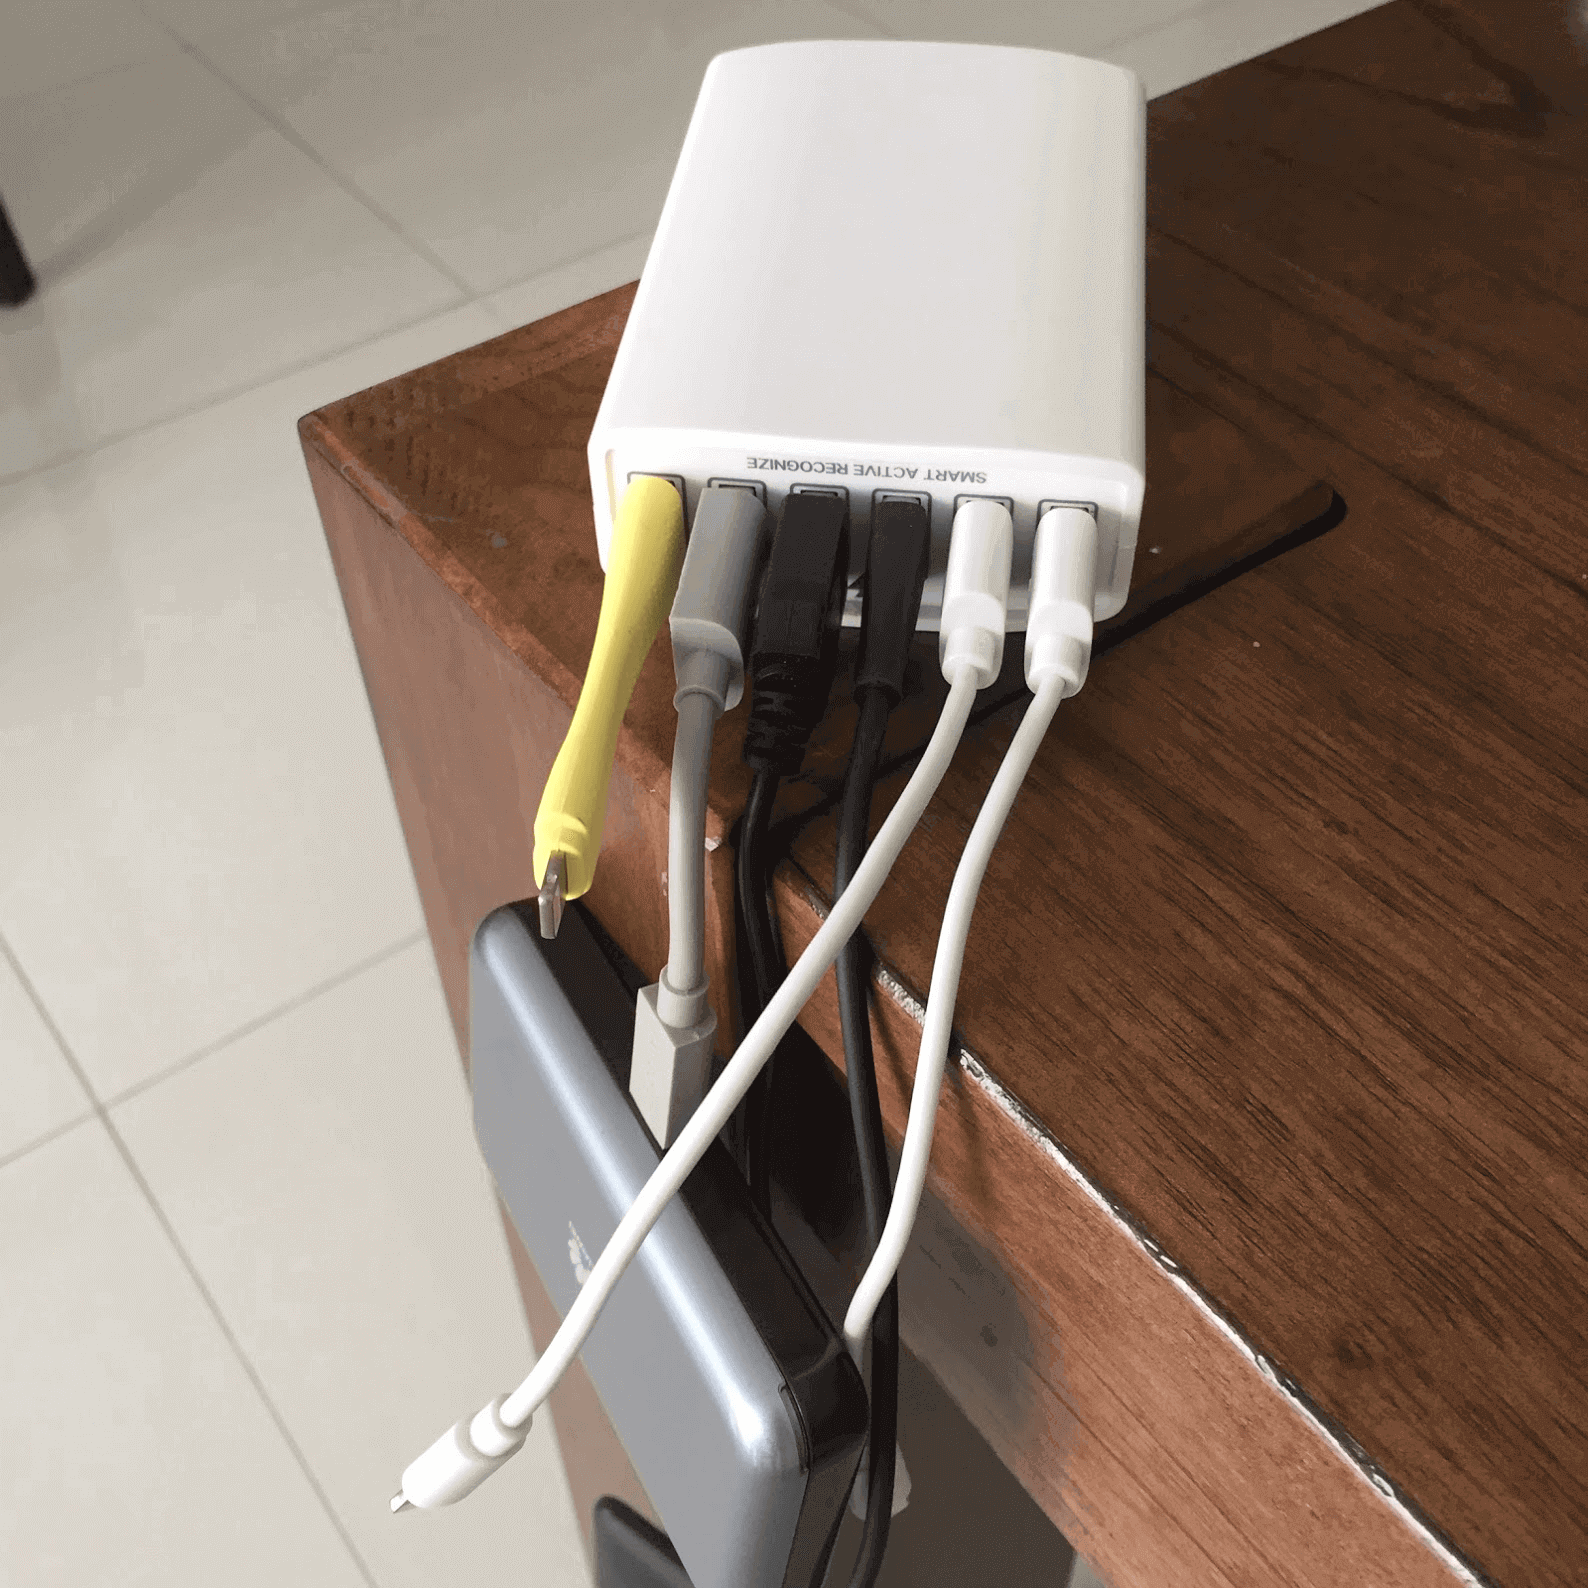 Multi-port USB charger